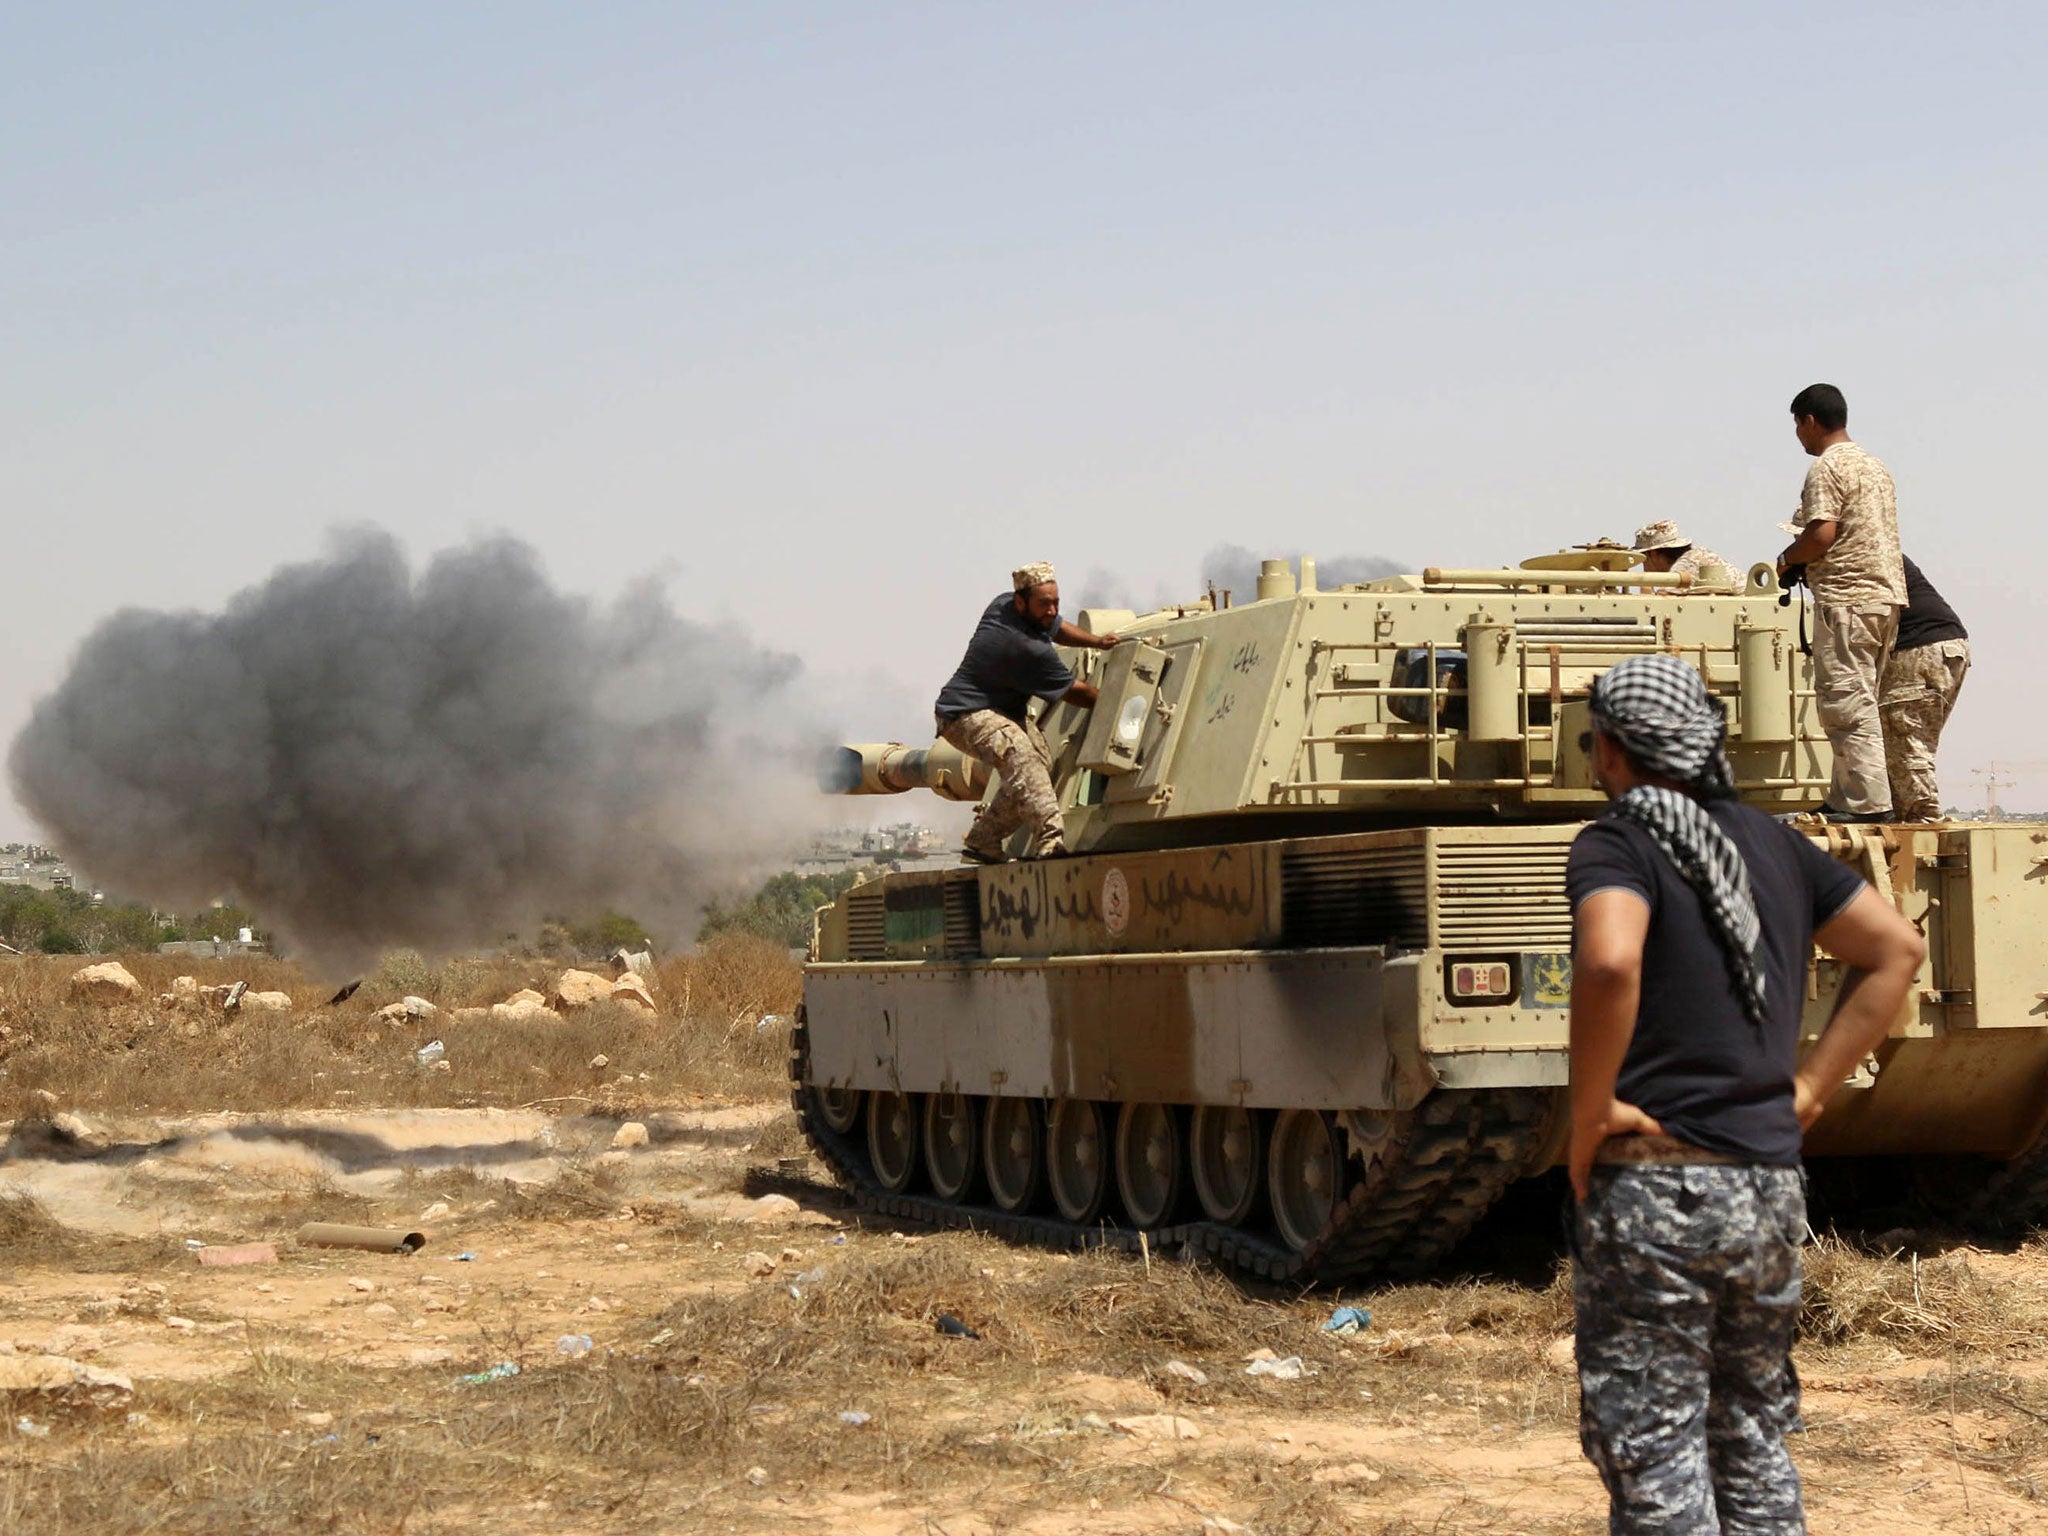 Forces loyal to Libya’s UN-backed unity government fire from a tank in Sirte on Friday